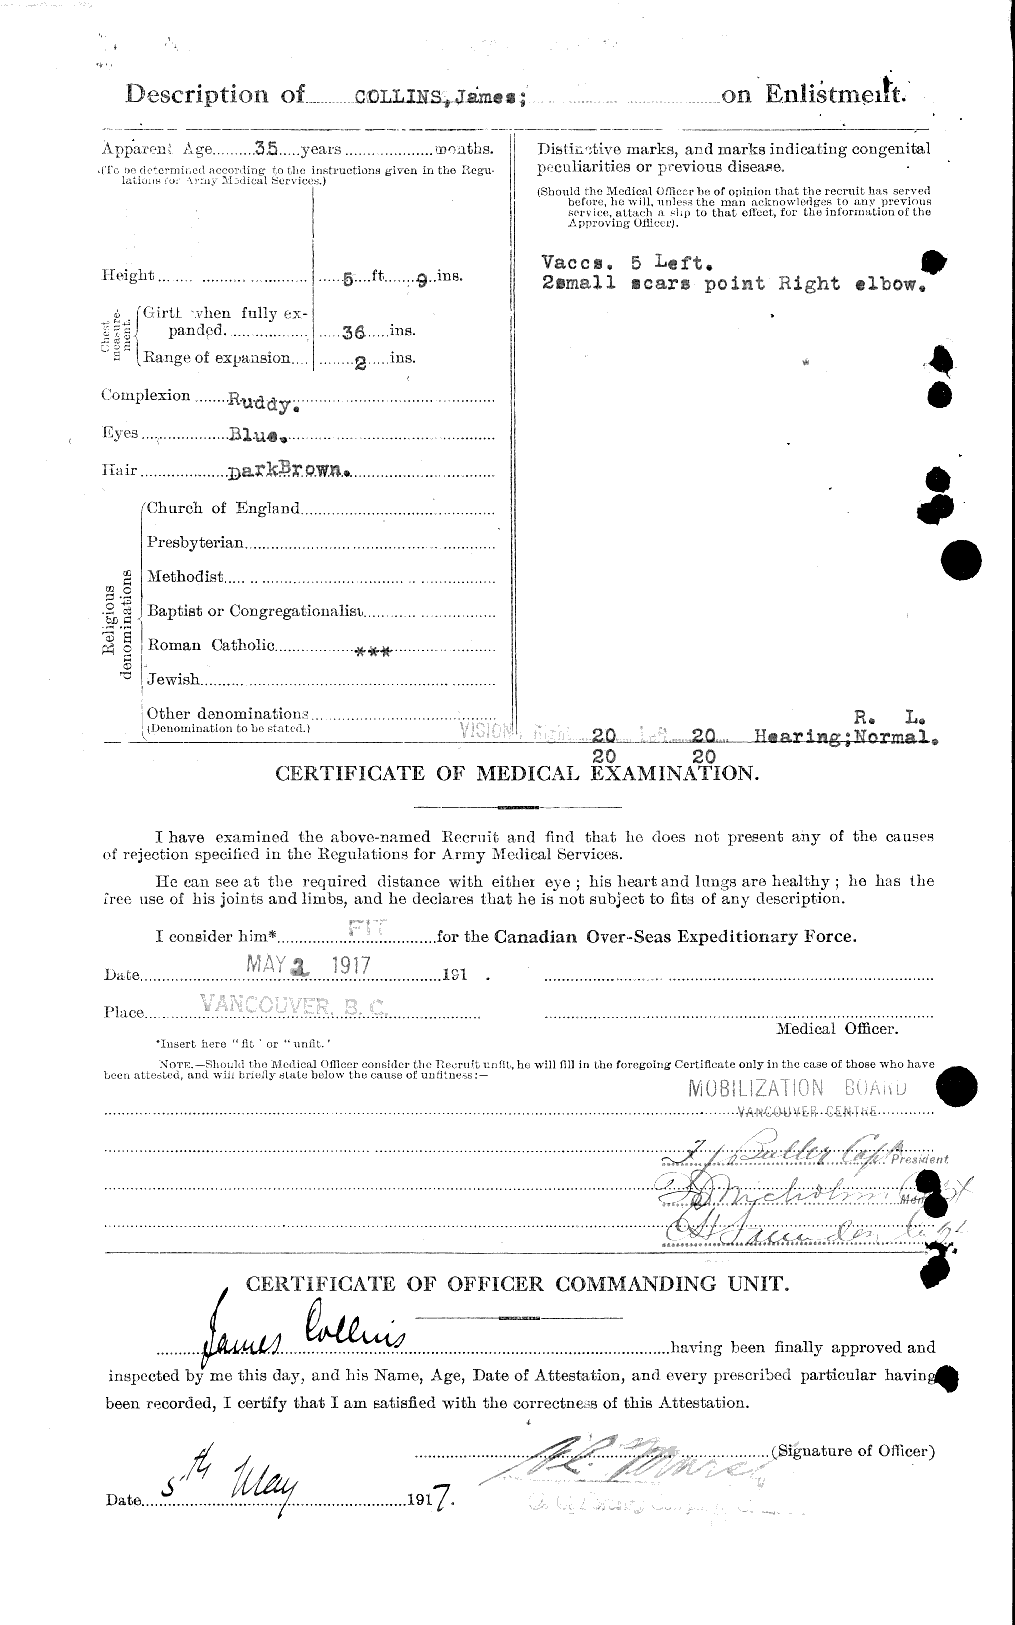 Personnel Records of the First World War - CEF 037919b